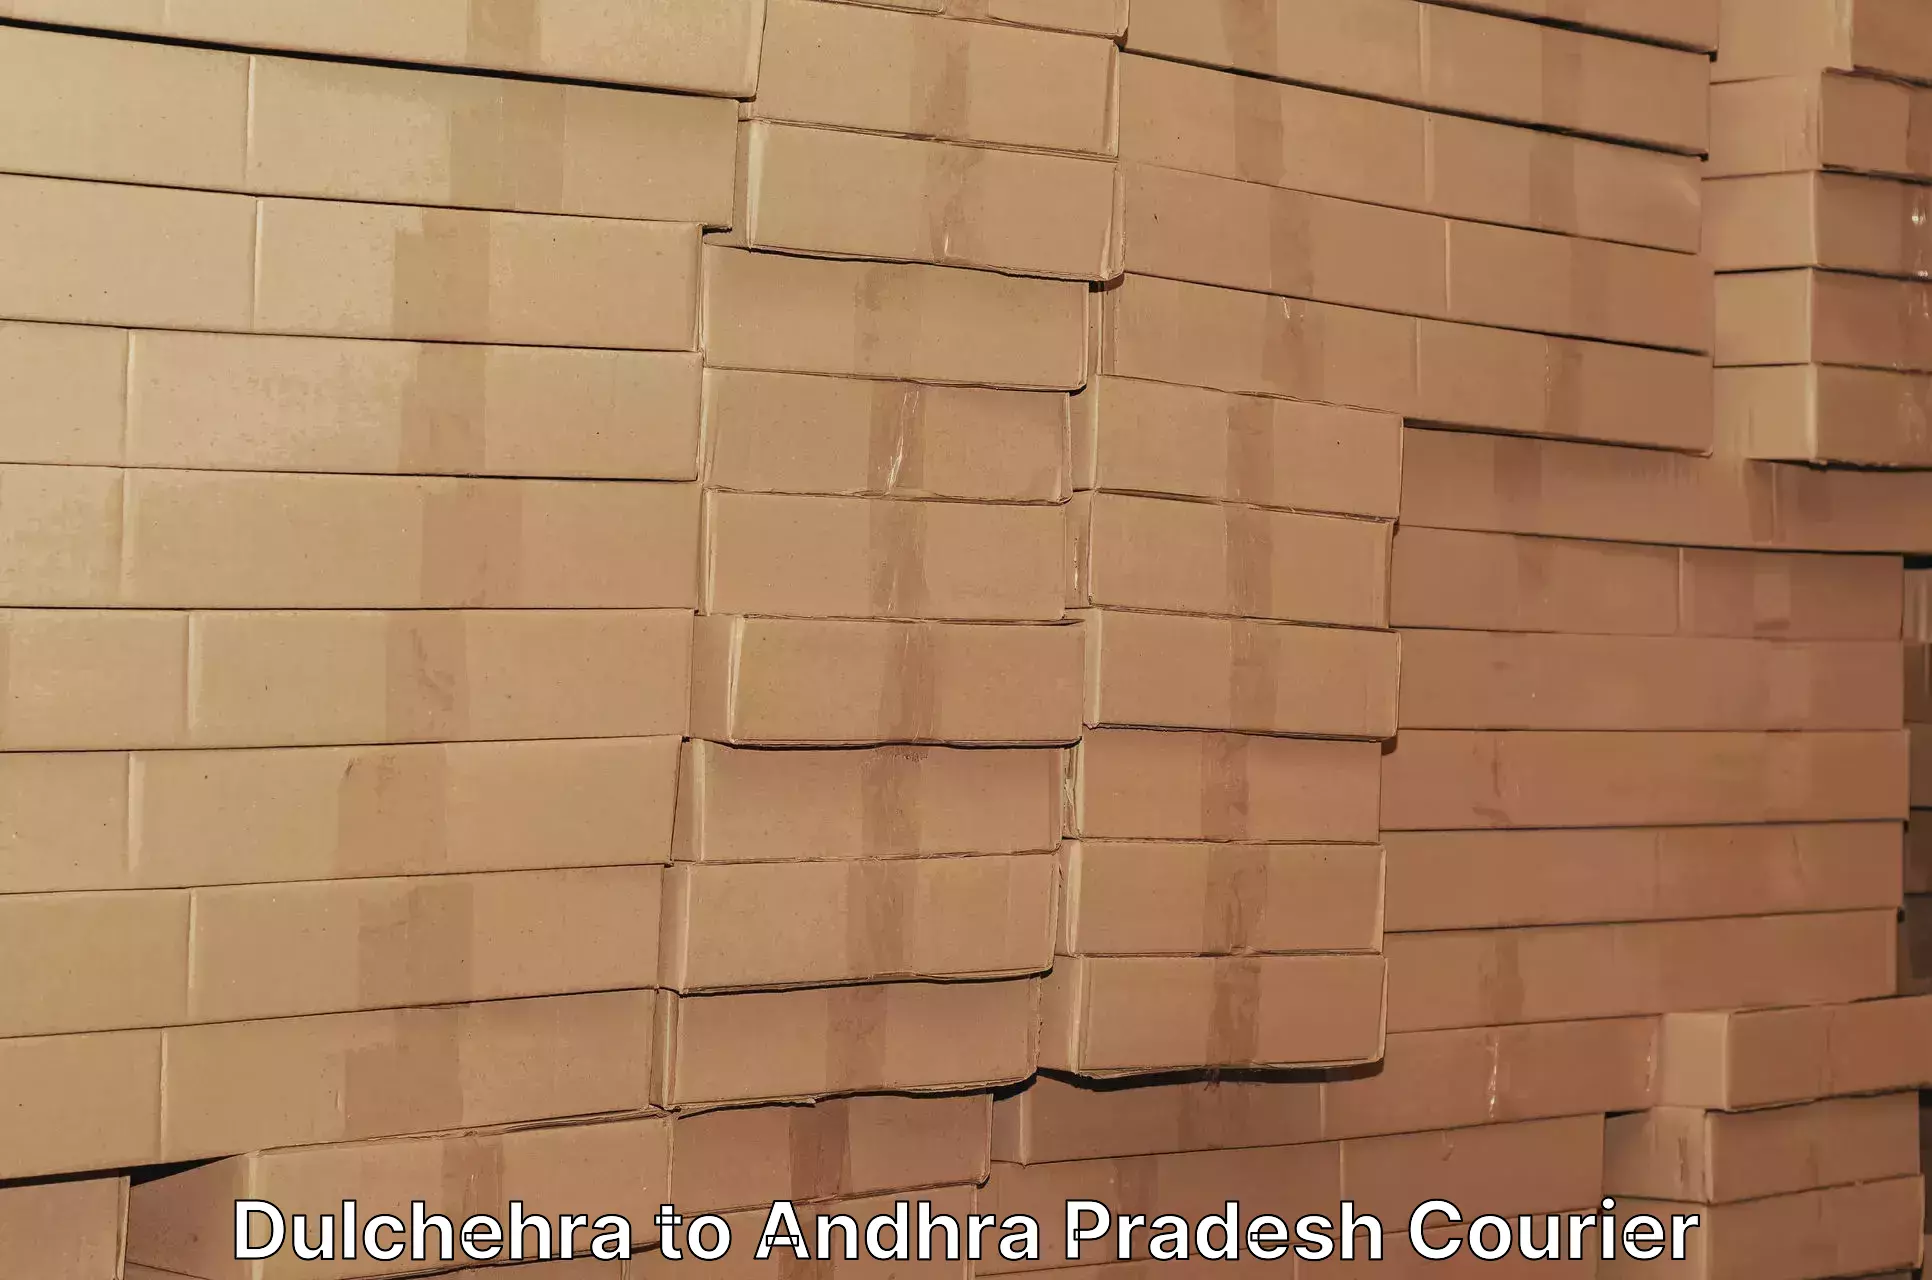 Overnight delivery services Dulchehra to Andhra Pradesh